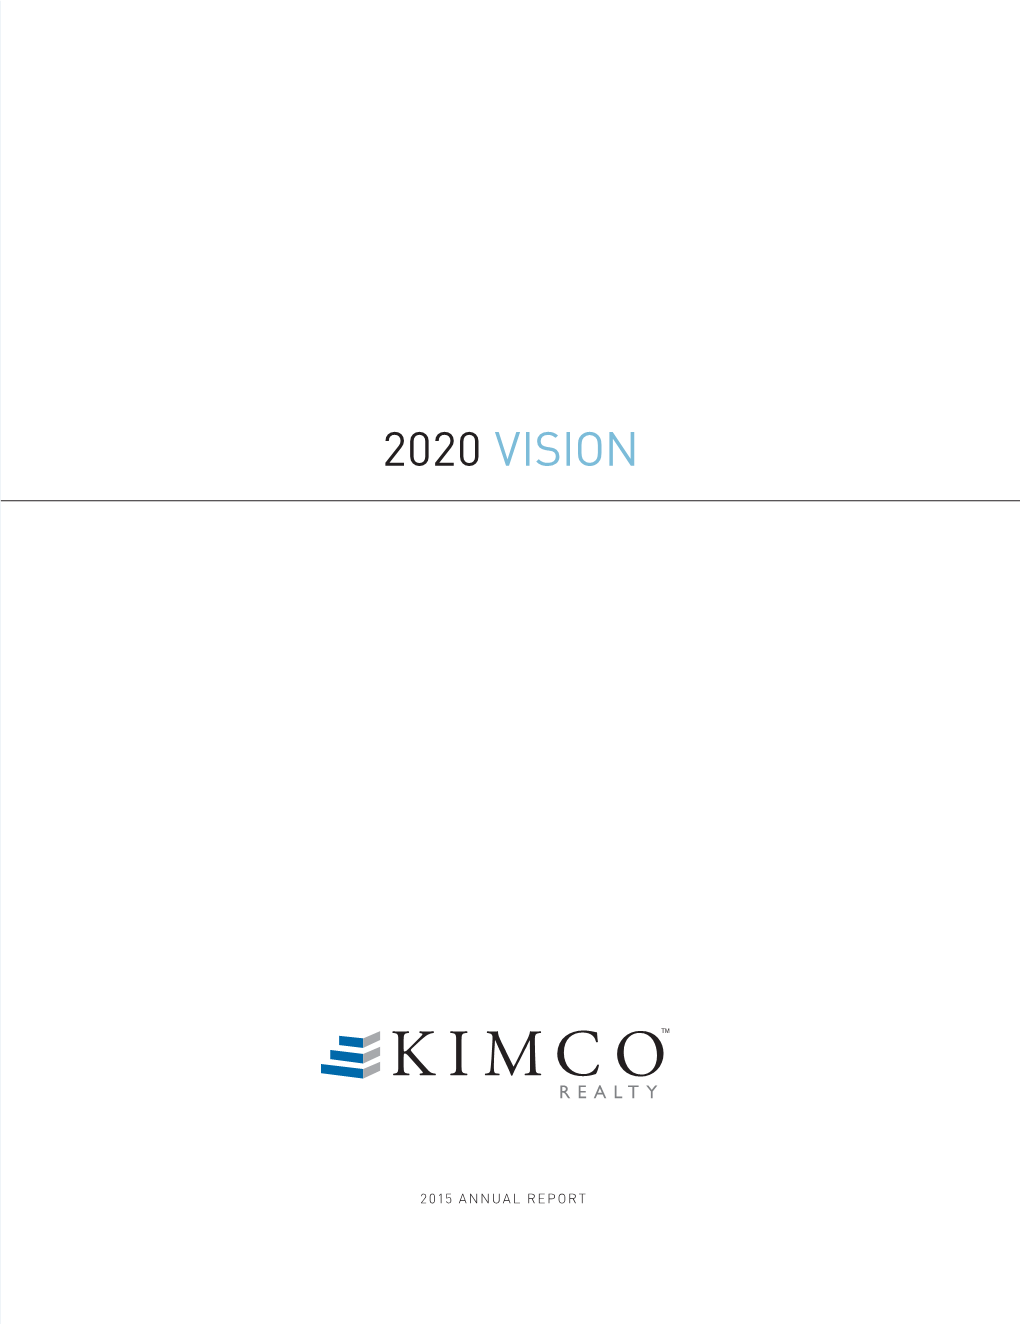 Kimco Realty 2015 Annual Report